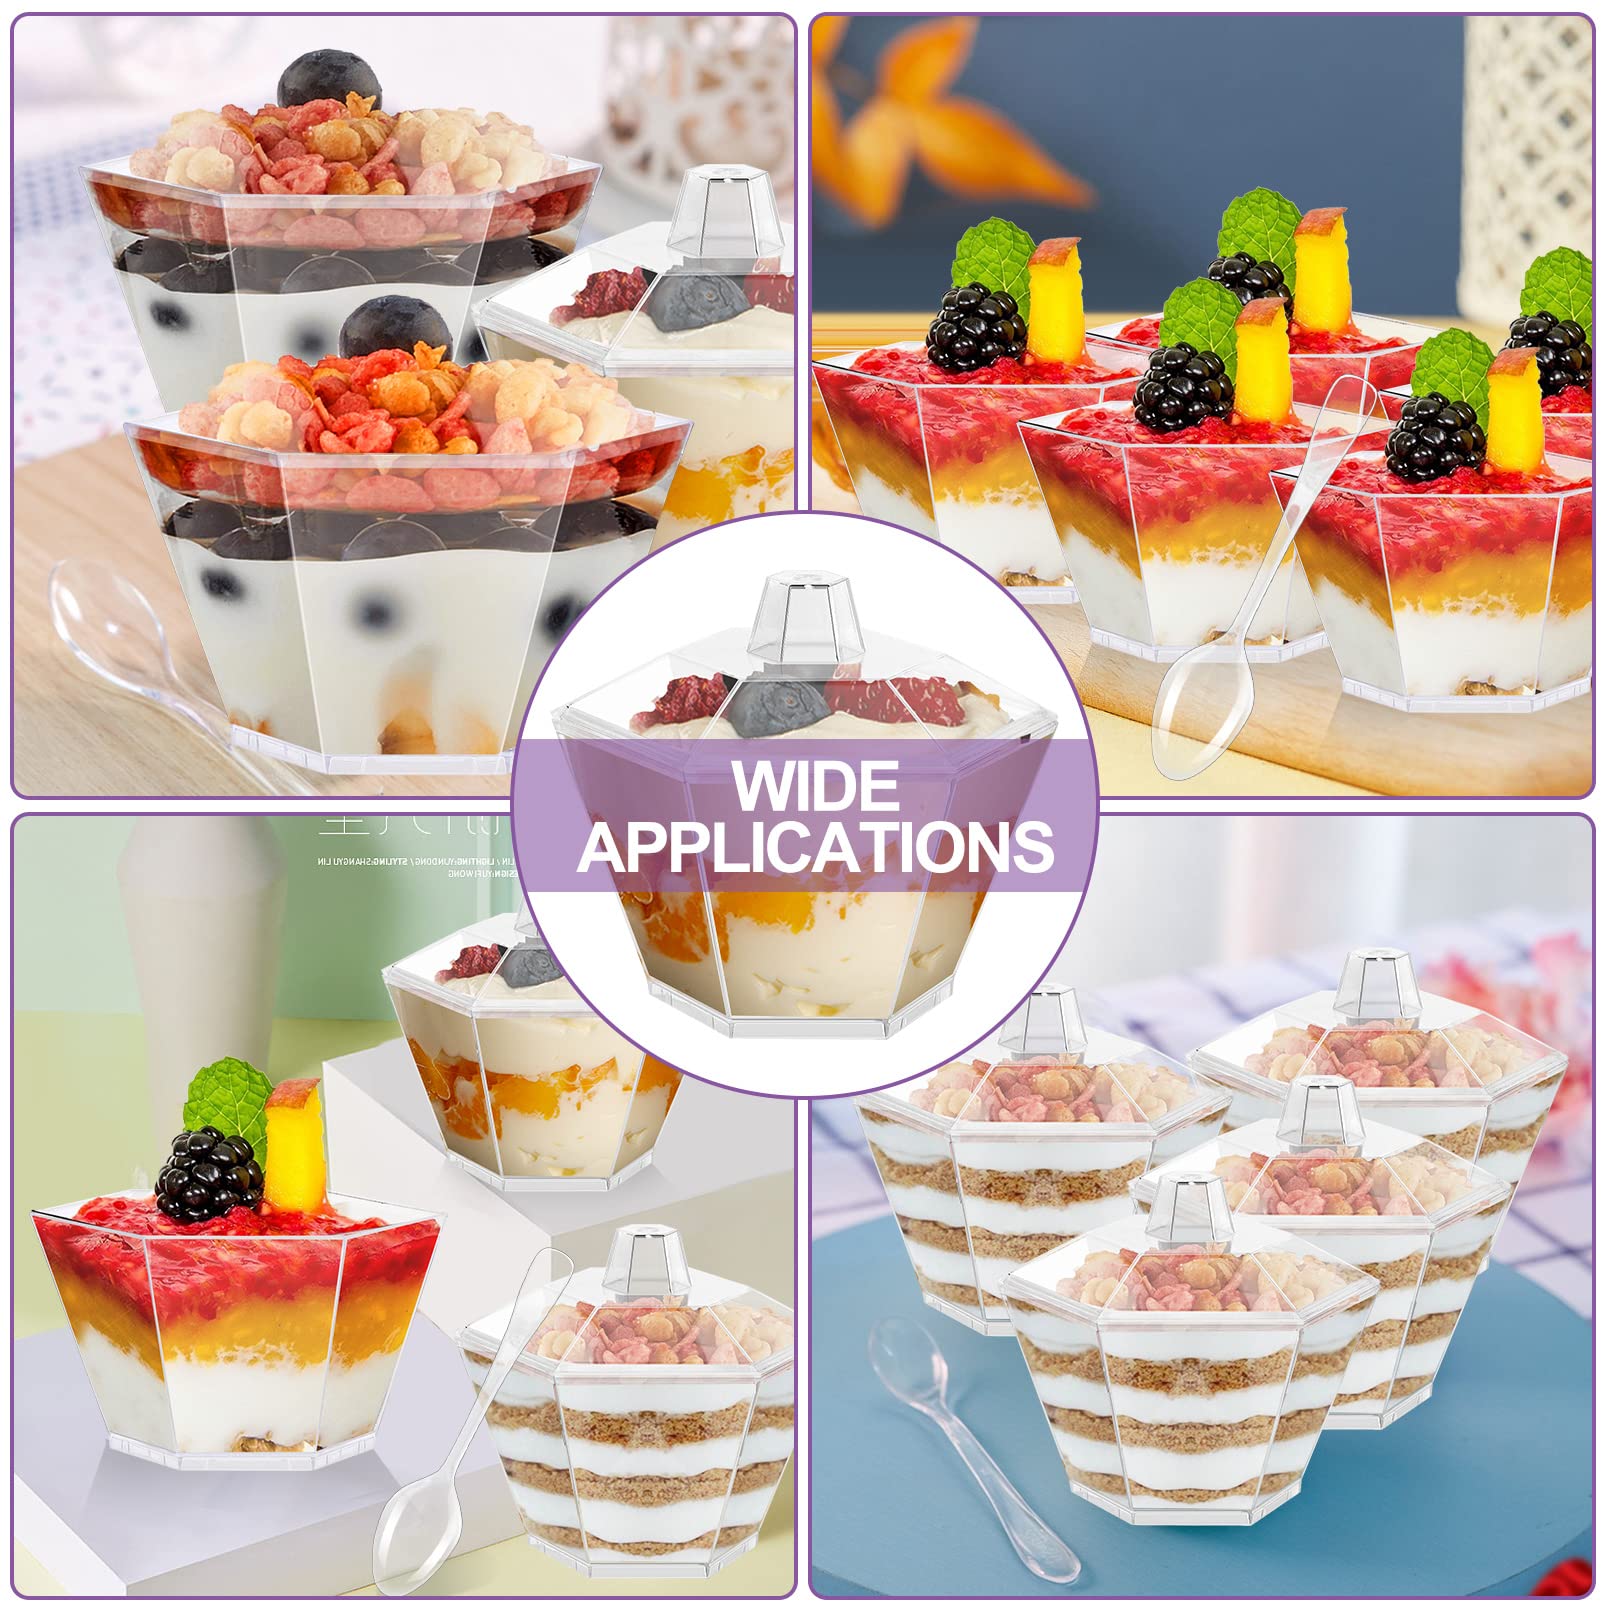 50 Pack Clear Plastic Dessert Cups with 50 Lids and 50 Spoons,3.3oz Hexagonal Parfait Cups Appetizer Cups,Disposable Mini Dessert Cups Tumbler Serving Cups for Desserts,Appetizers,Mousse,Puddings